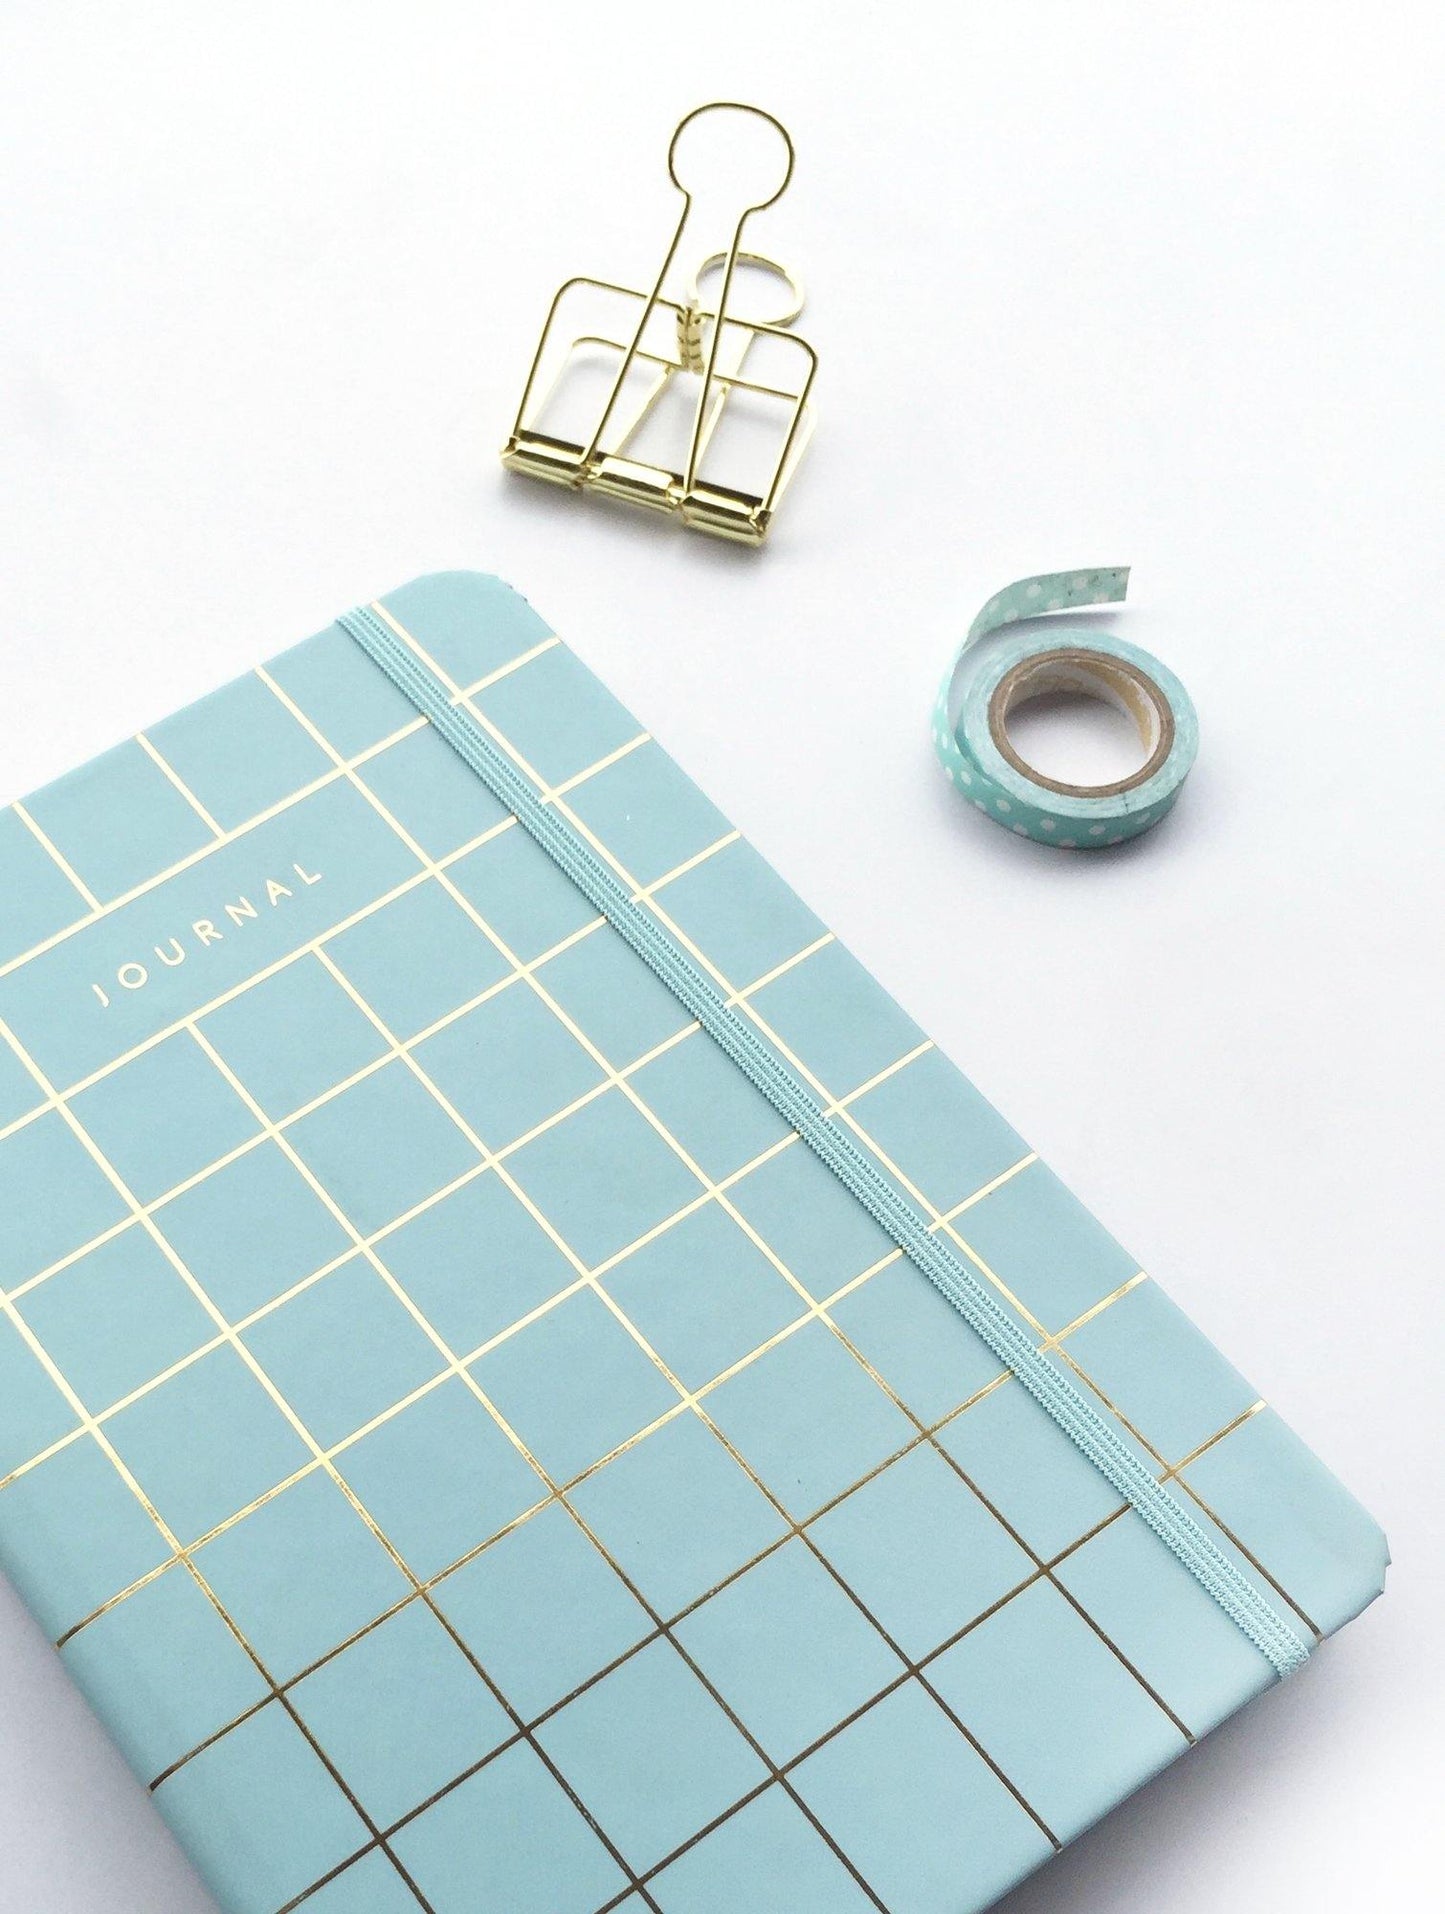 Gold Foiled Supreme Multi-Purpose Journal Notebook | Hardcover | Plain pages | Available in 5 colors - Supple Room